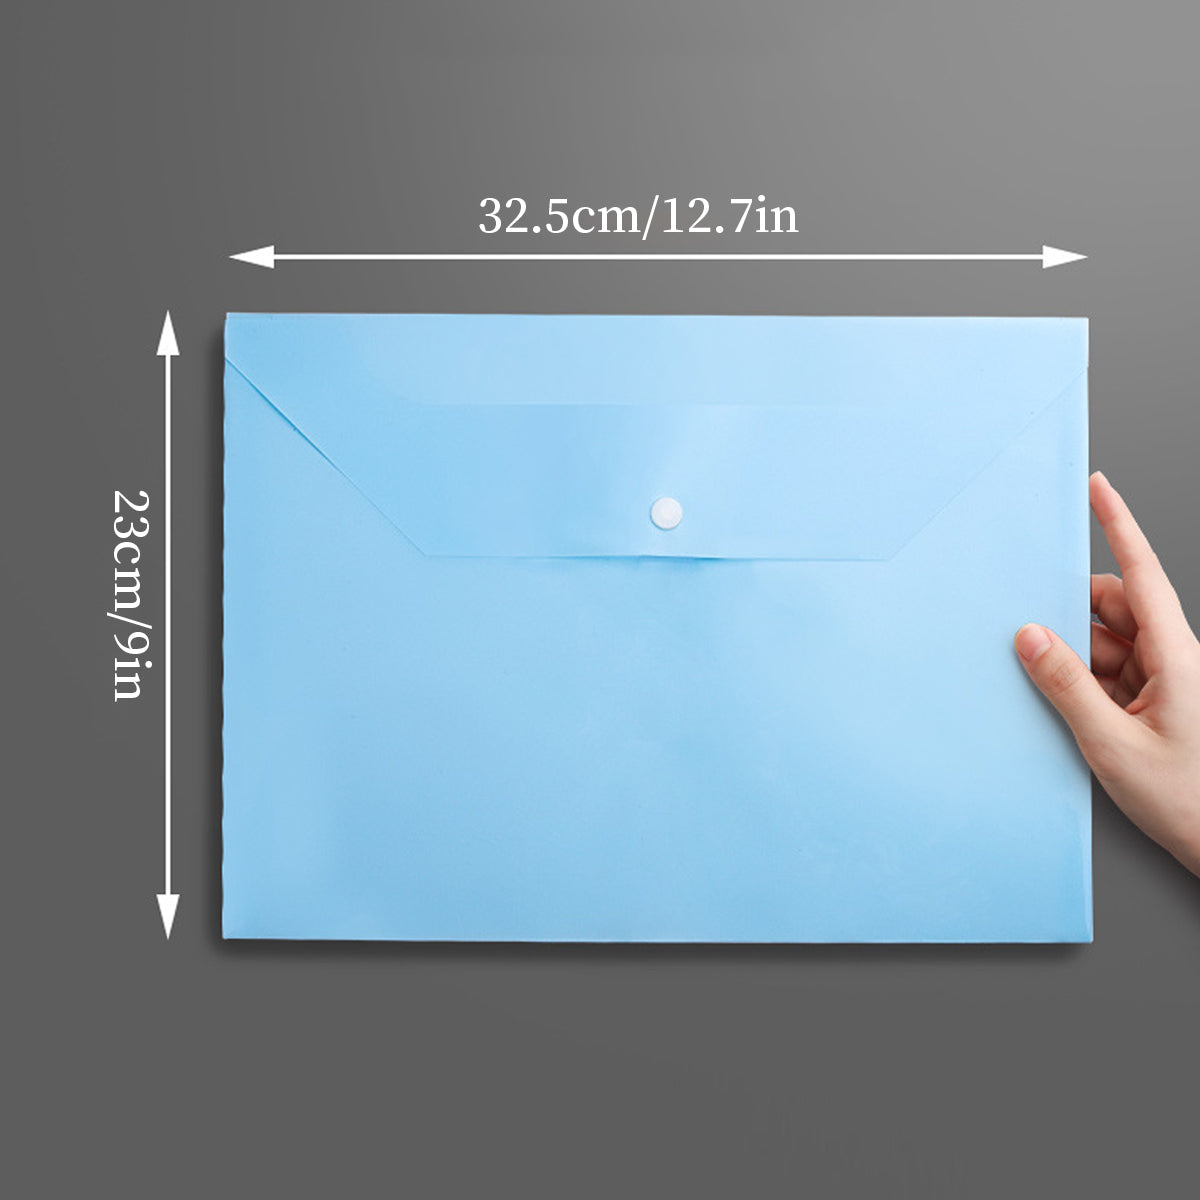 20pcs Plastic Envelopes,Poly Envelopes with Snap Button Closure,Clear Document Folders Letter A4 Size File Envelopes,Plastic File Folders for School Home Work Office Organization